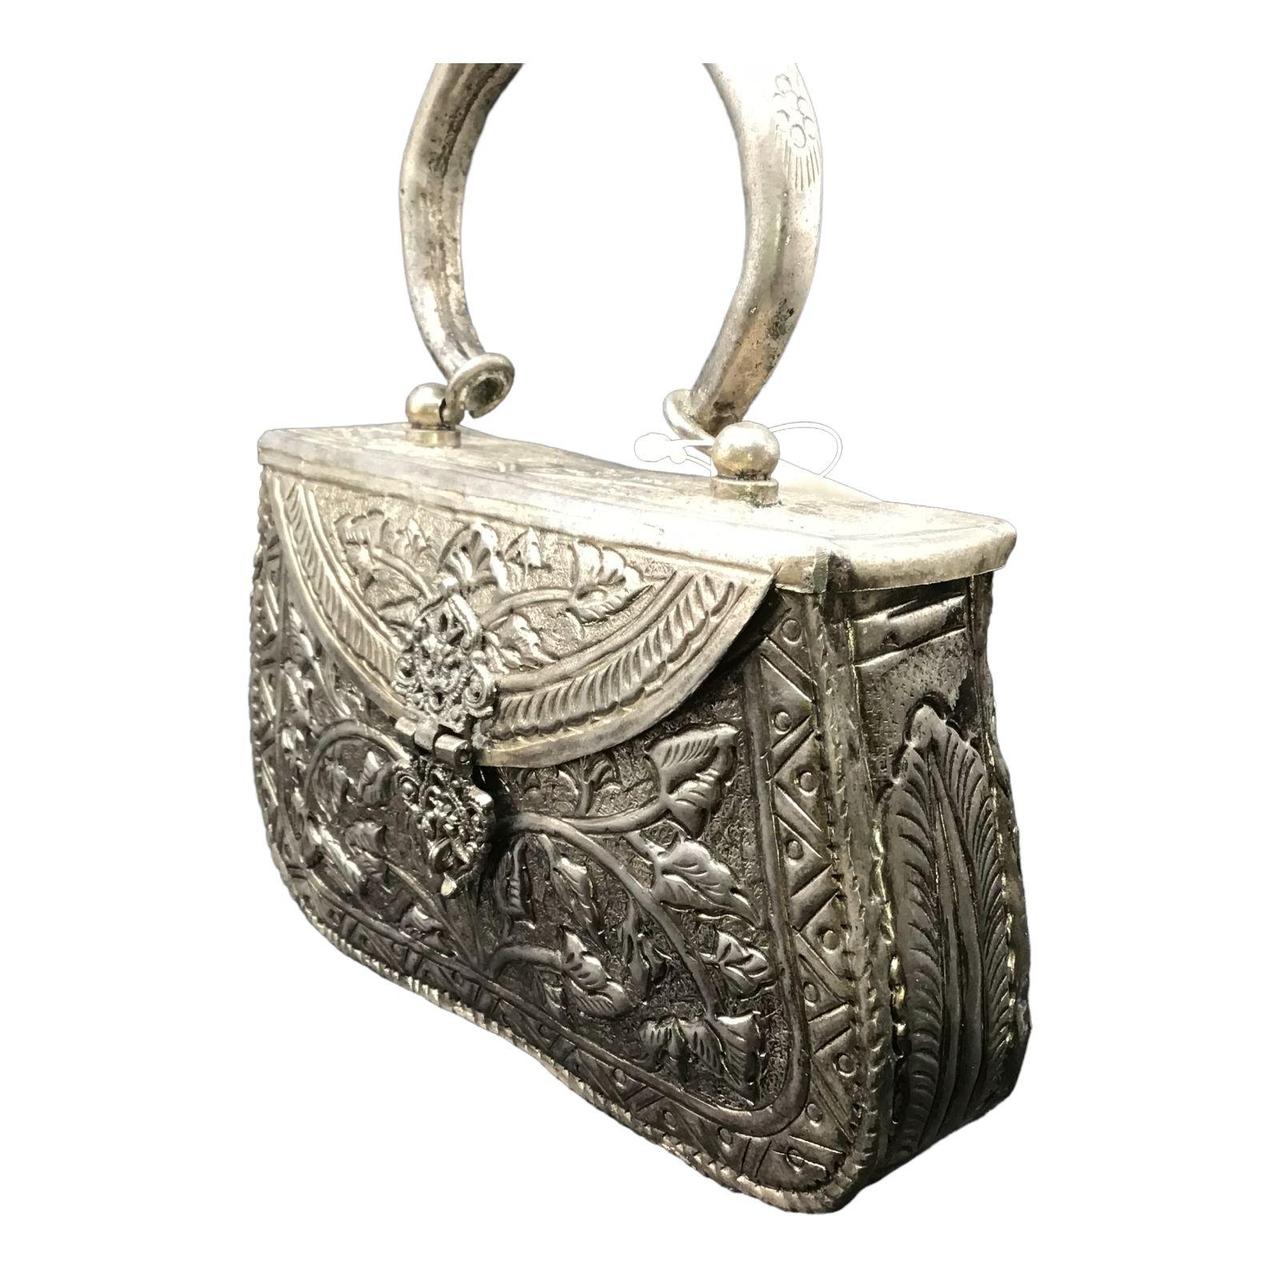 Product Image 2 - Metal Purse Hand Crafted Decorative